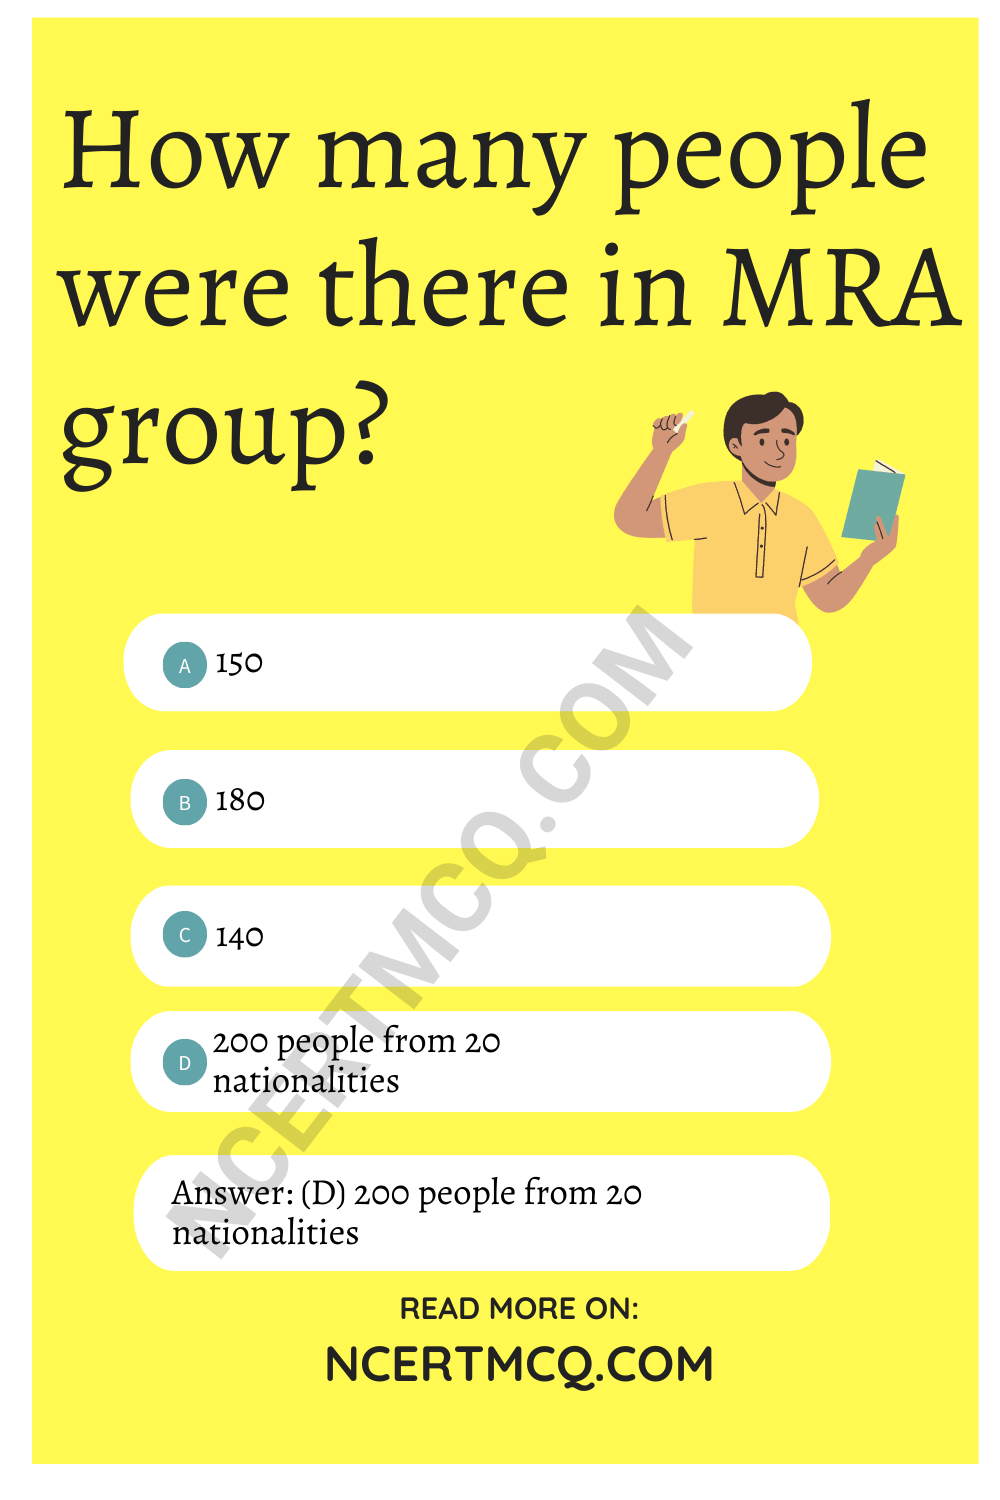 How many people were there in MRA group?